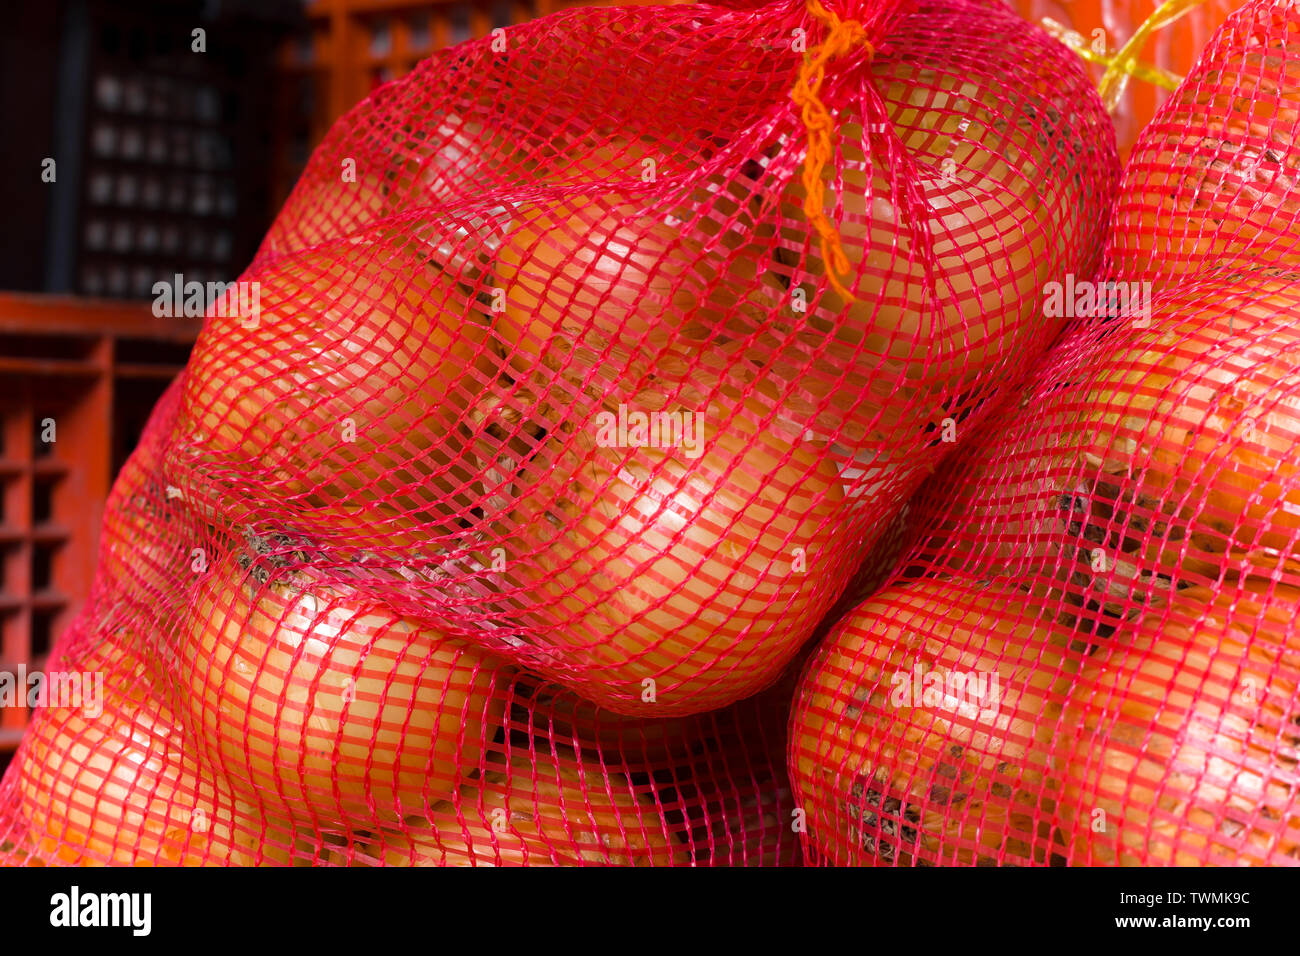 https://c8.alamy.com/comp/TWMK9C/onion-onion-pictures-in-big-bags-winter-onions-paintings-onion-and-vegetables-in-large-nets-high-resolution-image-gallery-TWMK9C.jpg